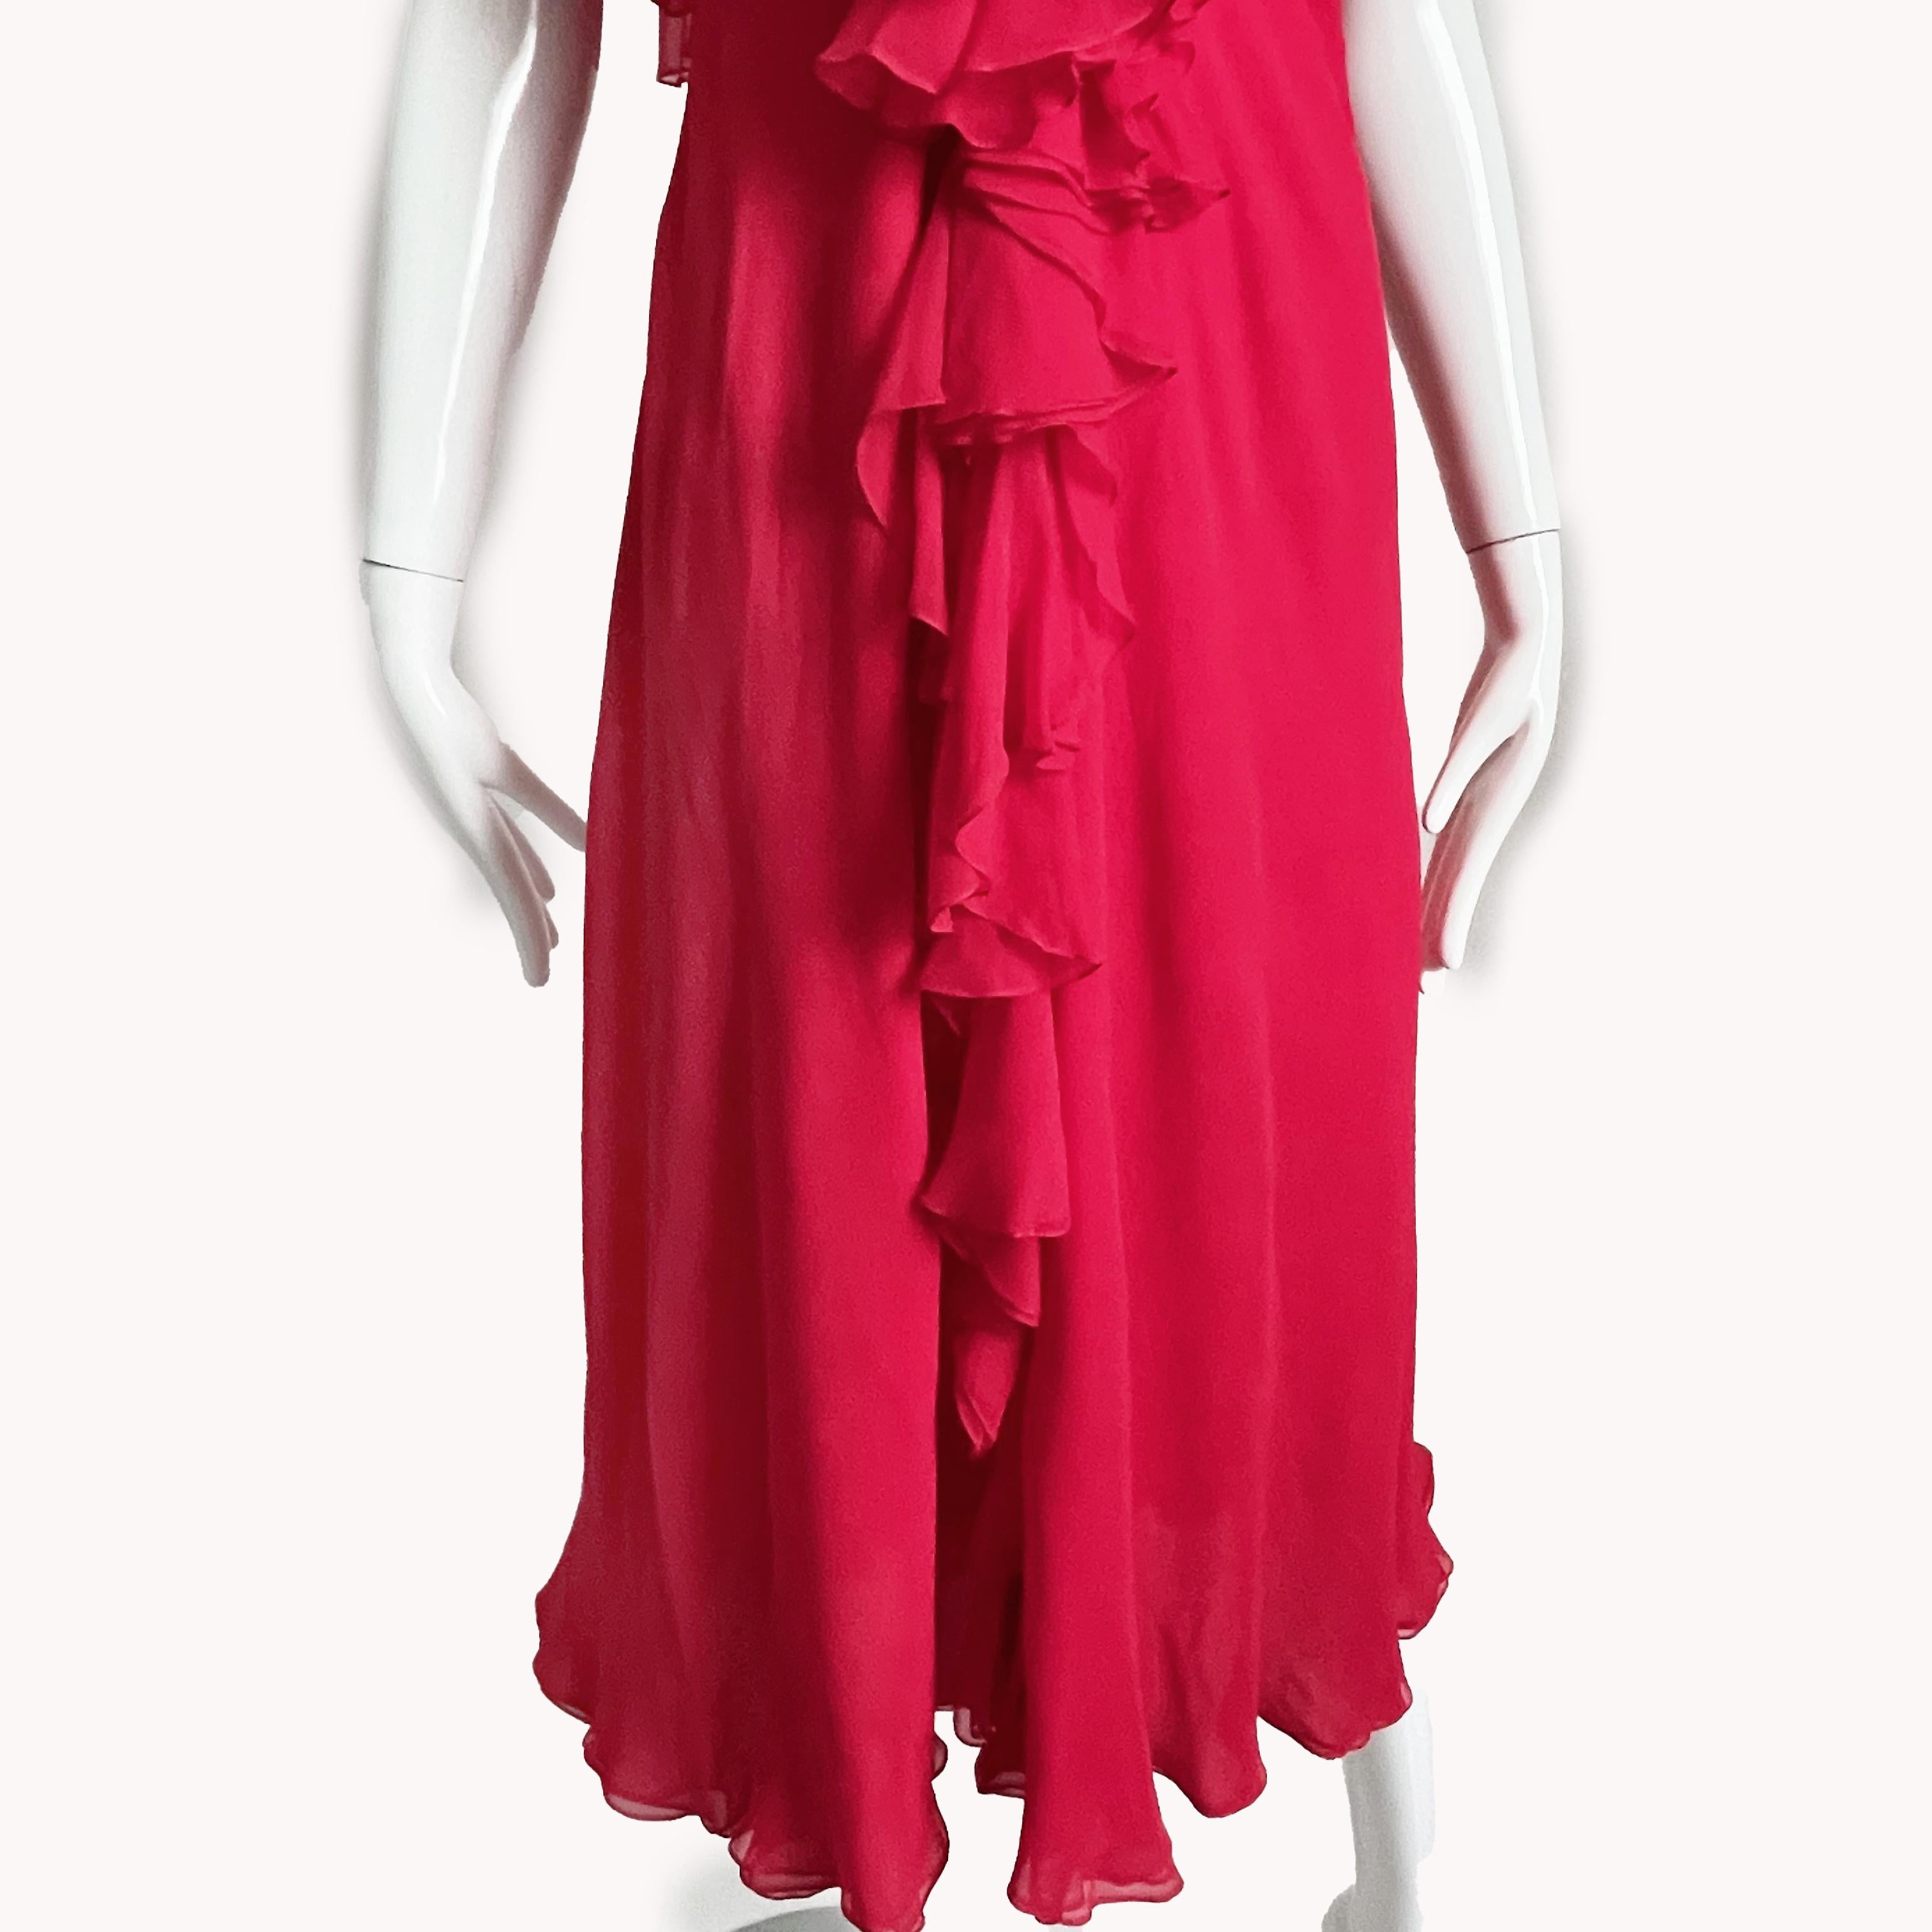 Pauline Trigere Dress and Shawl 2pc Set Red Silk Chiffon Loose Ruffles Vintage For Sale 6